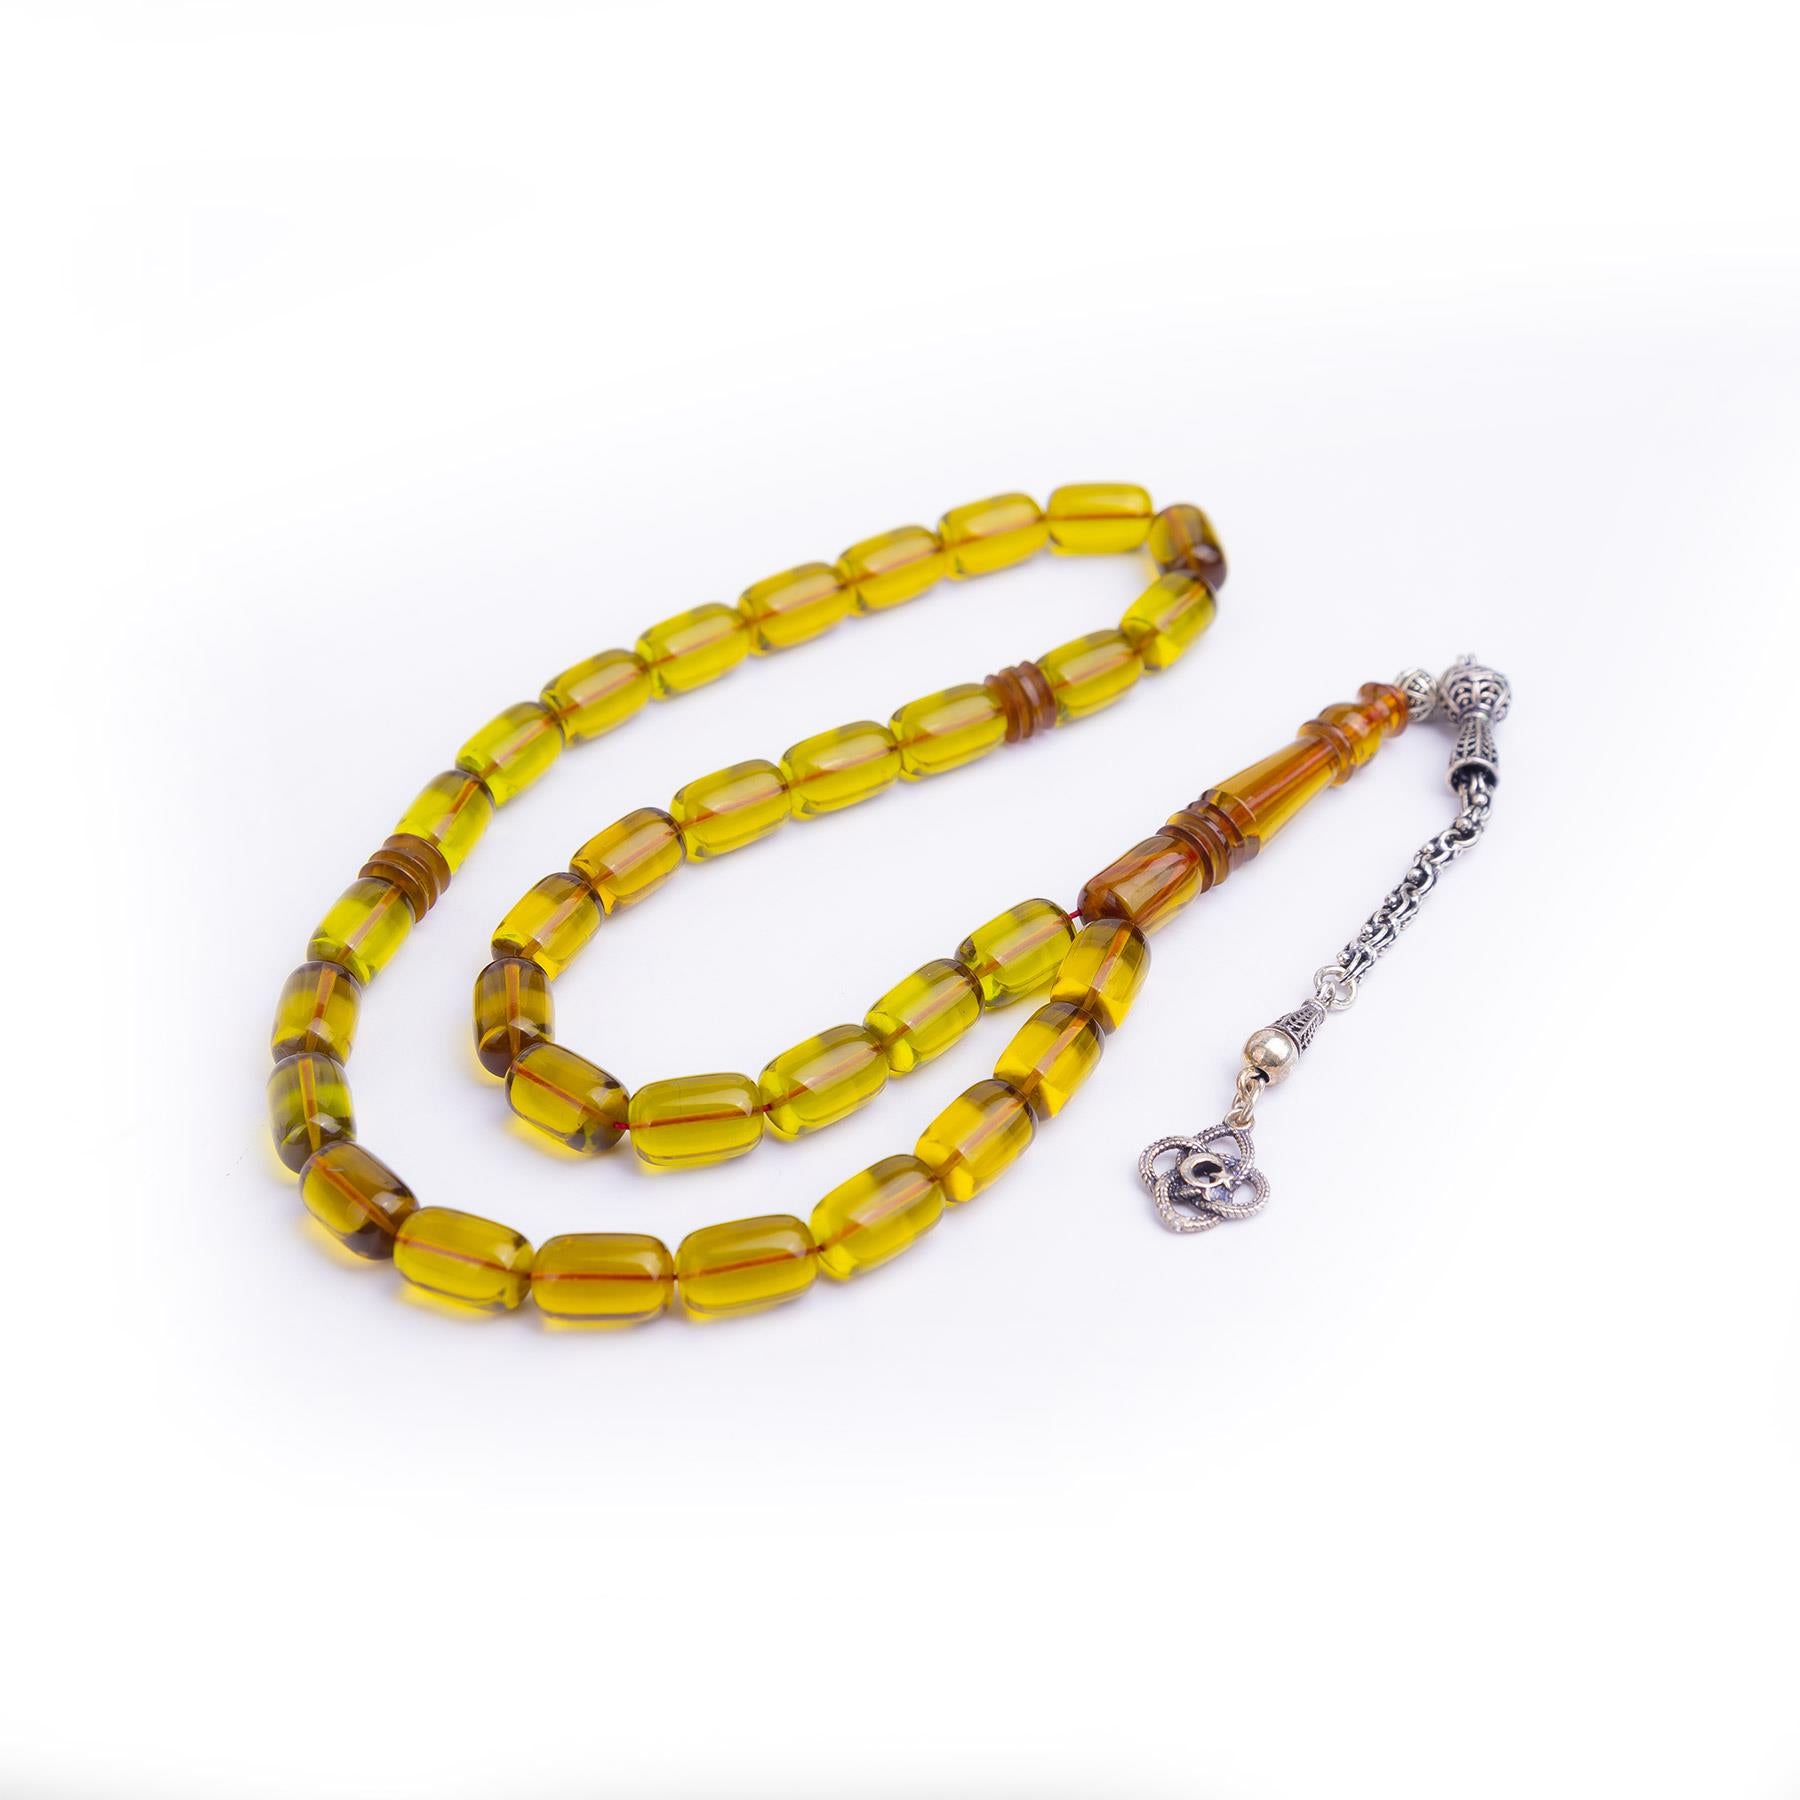 Ve Tesbih Capsule Cut Fire Amber Rosary with Silver Tassels 4